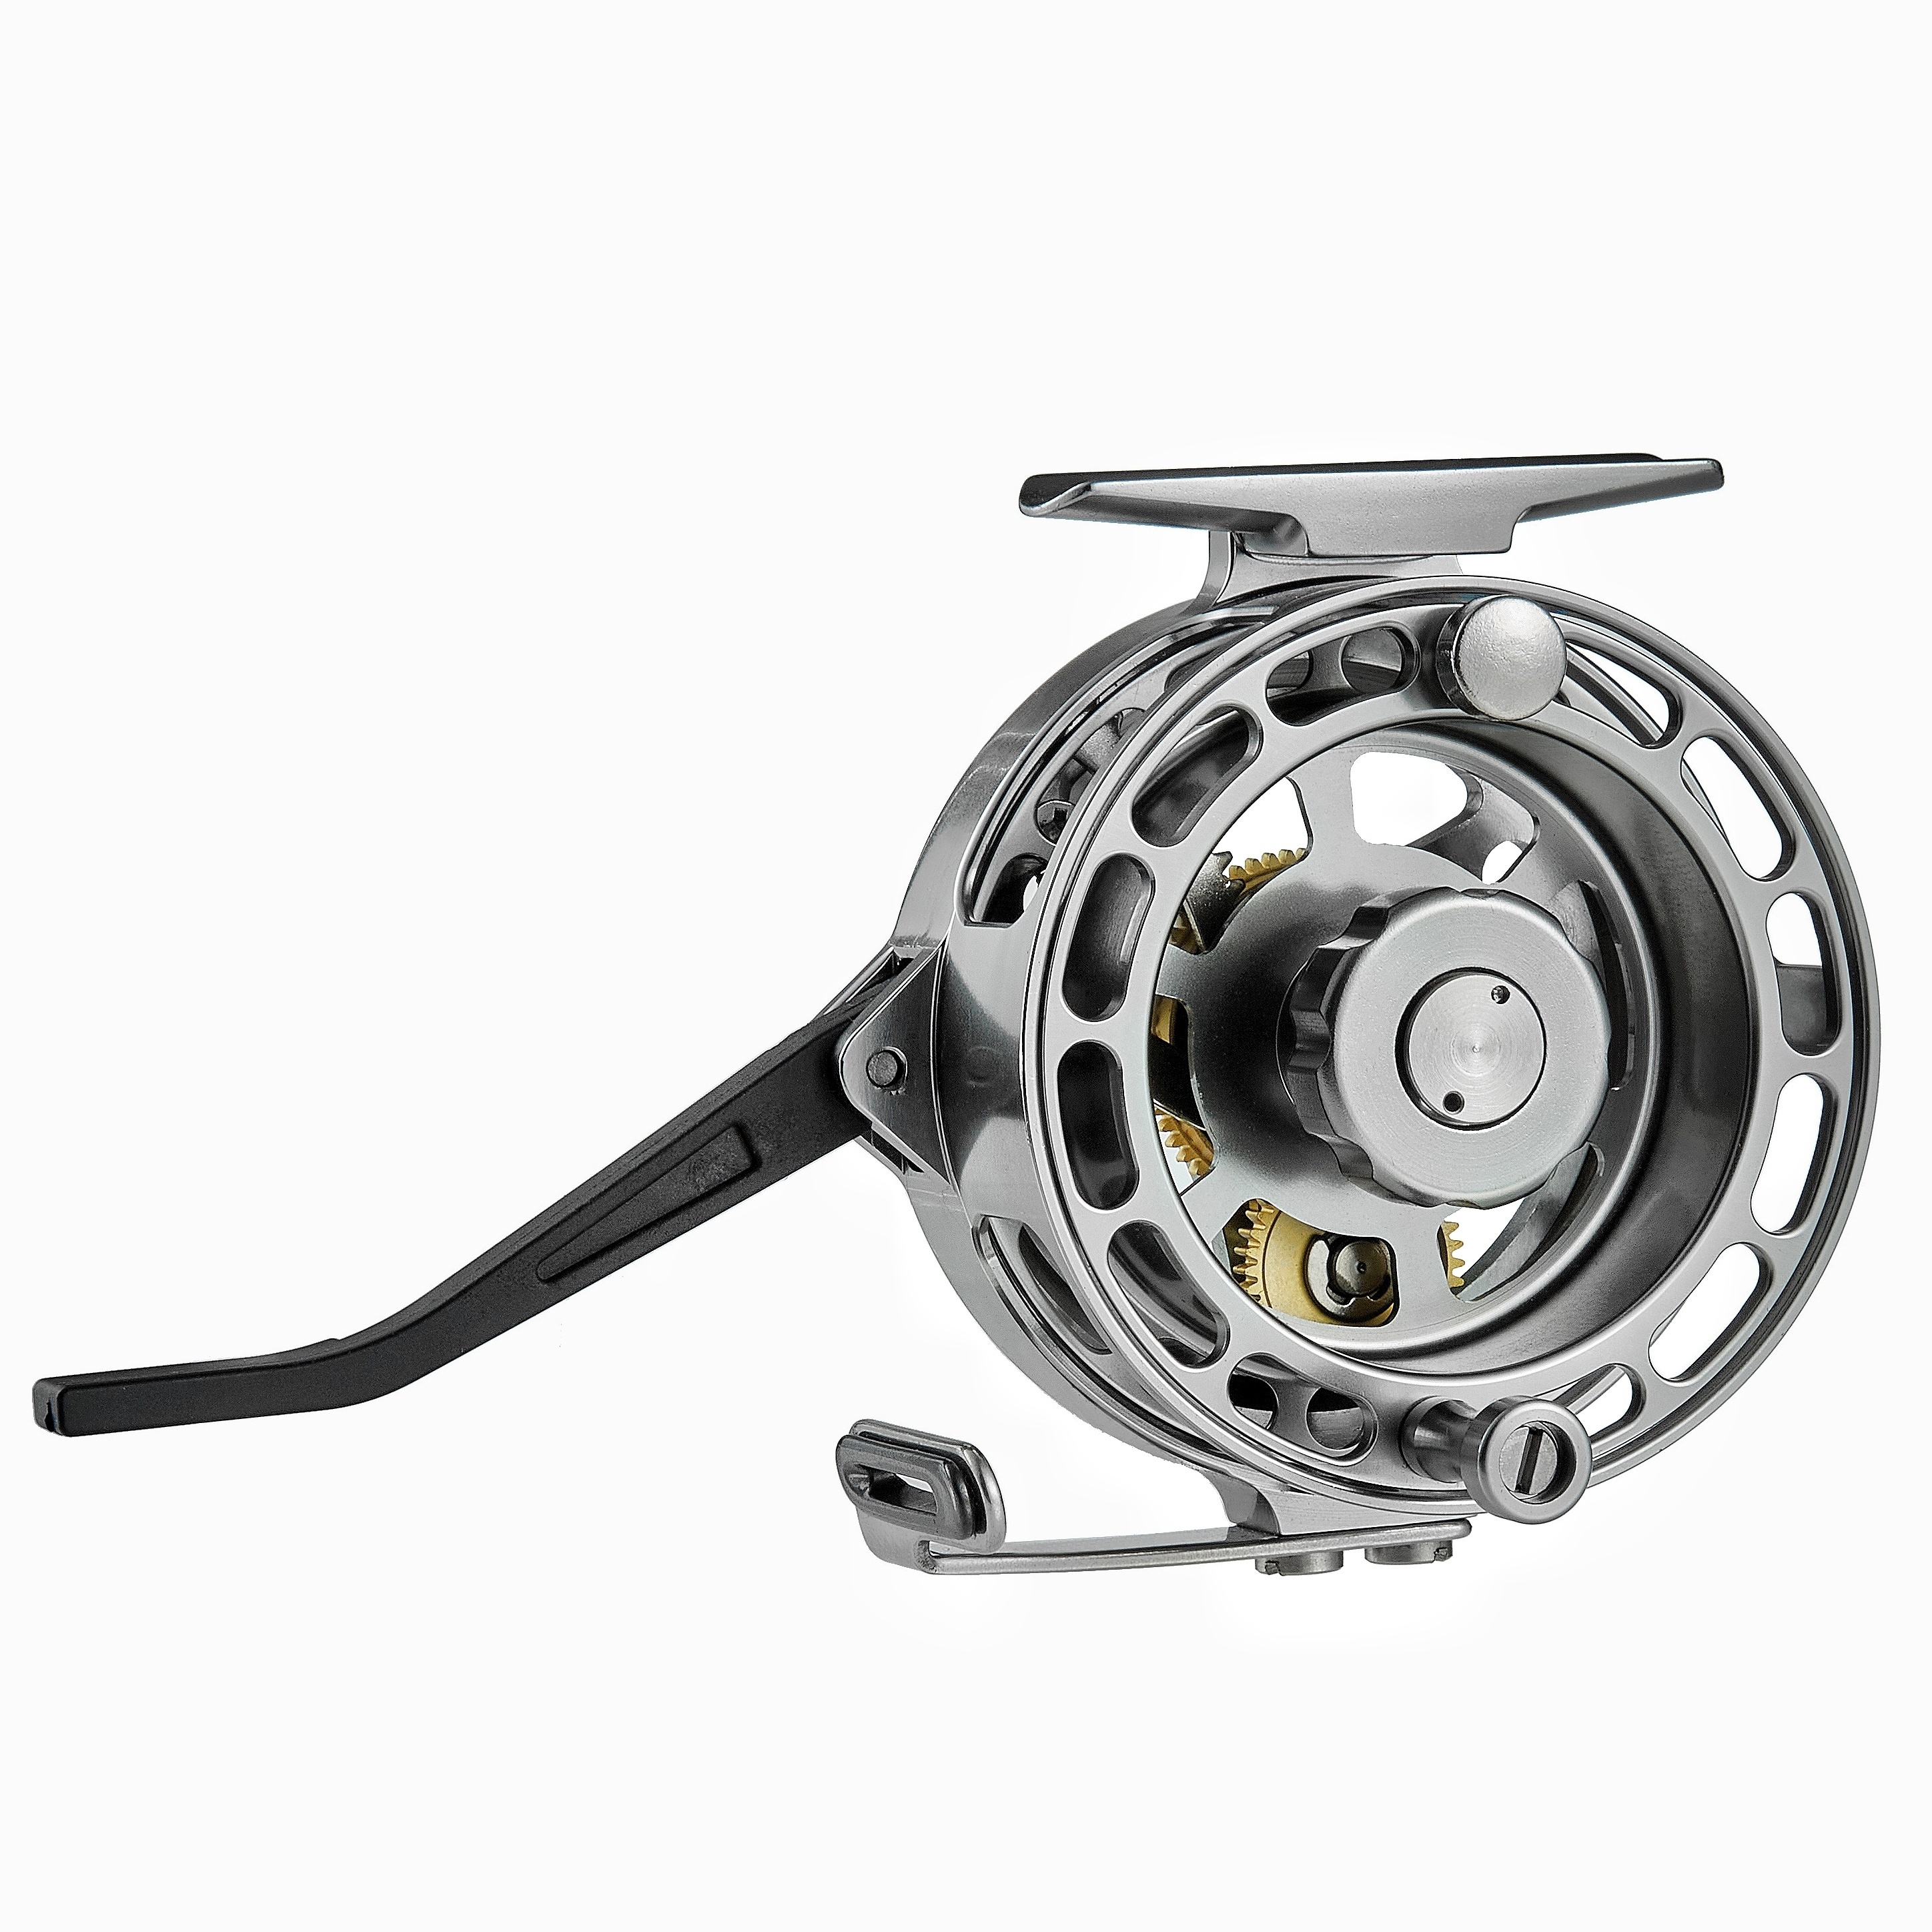 MASTER LOGIC Master One Fly Fishing Reel 5/6wt, Quick Push Button Switch,  Durable Pre-Loaded Fly Reel with Line Combo